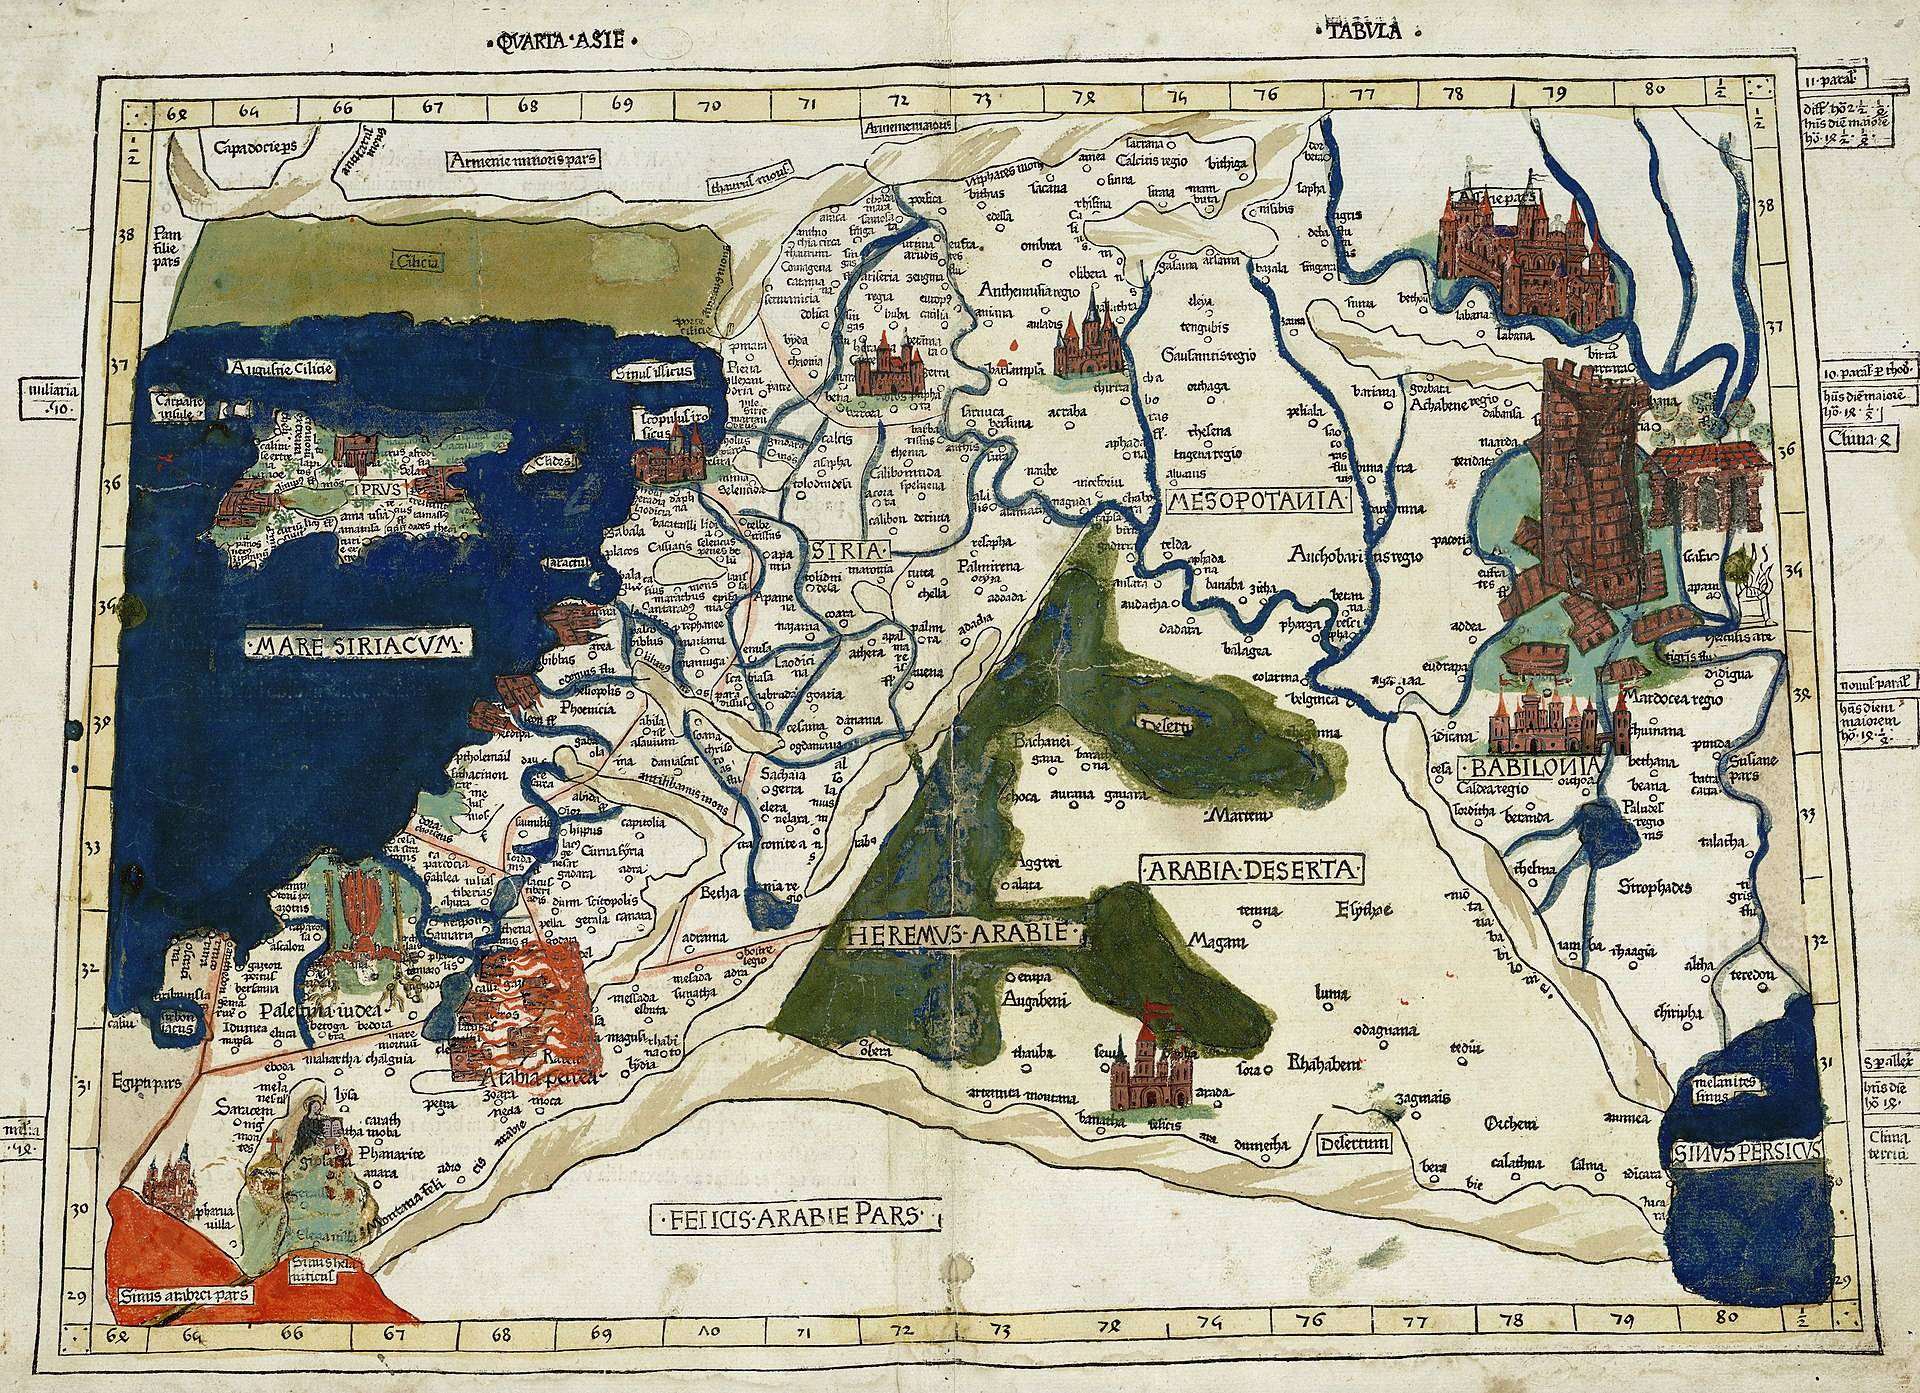 A 15th century copy of Ptolemy's fourth Asian map, depicting the area known as the Fertile Crescent